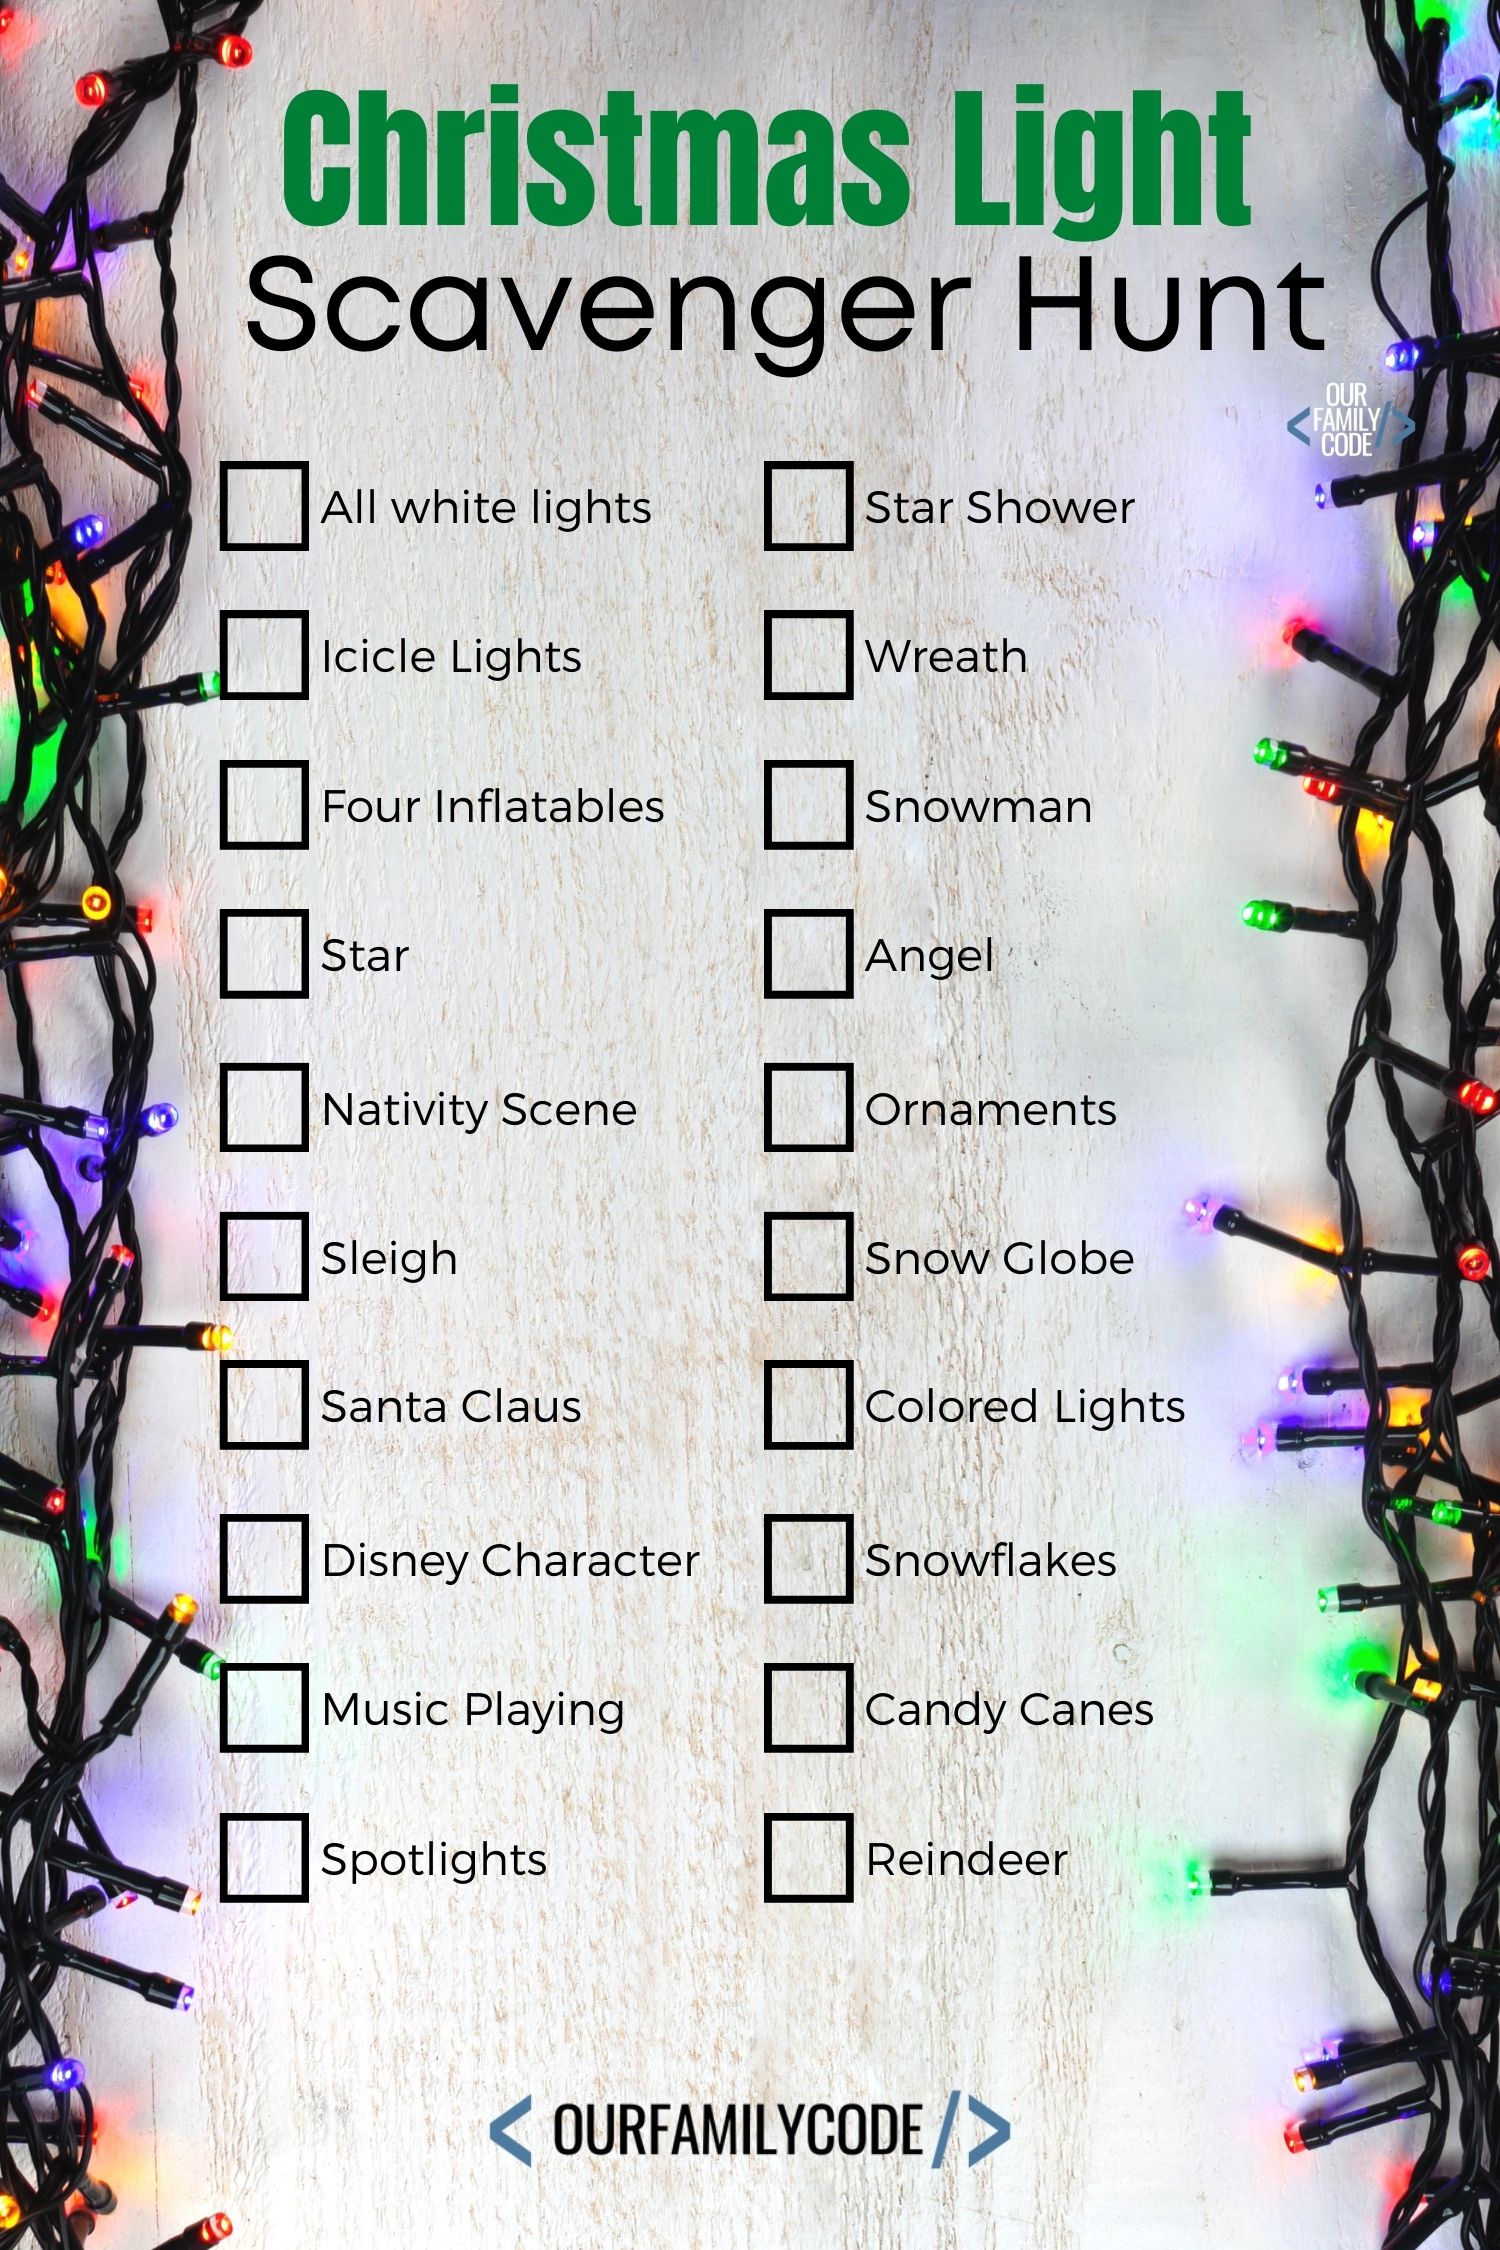 A picture of a Christmas light scavenger hunt.